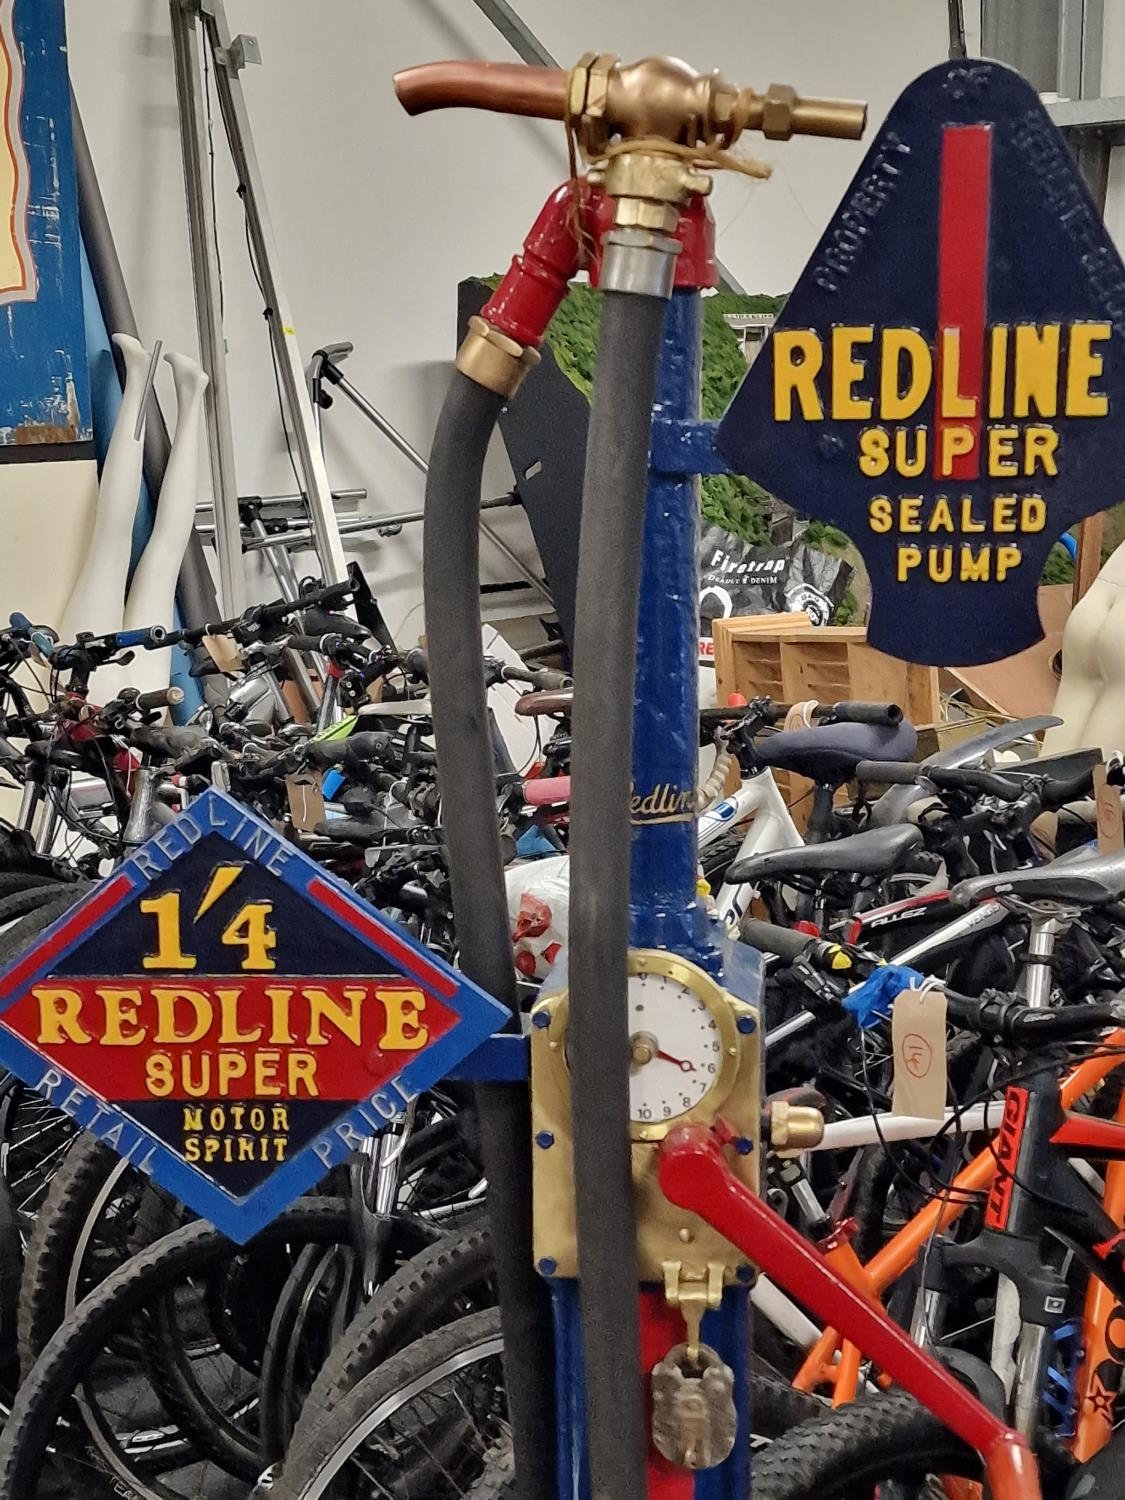 Redline 1920's/30's petrol pump in excellent condition. - Image 2 of 3